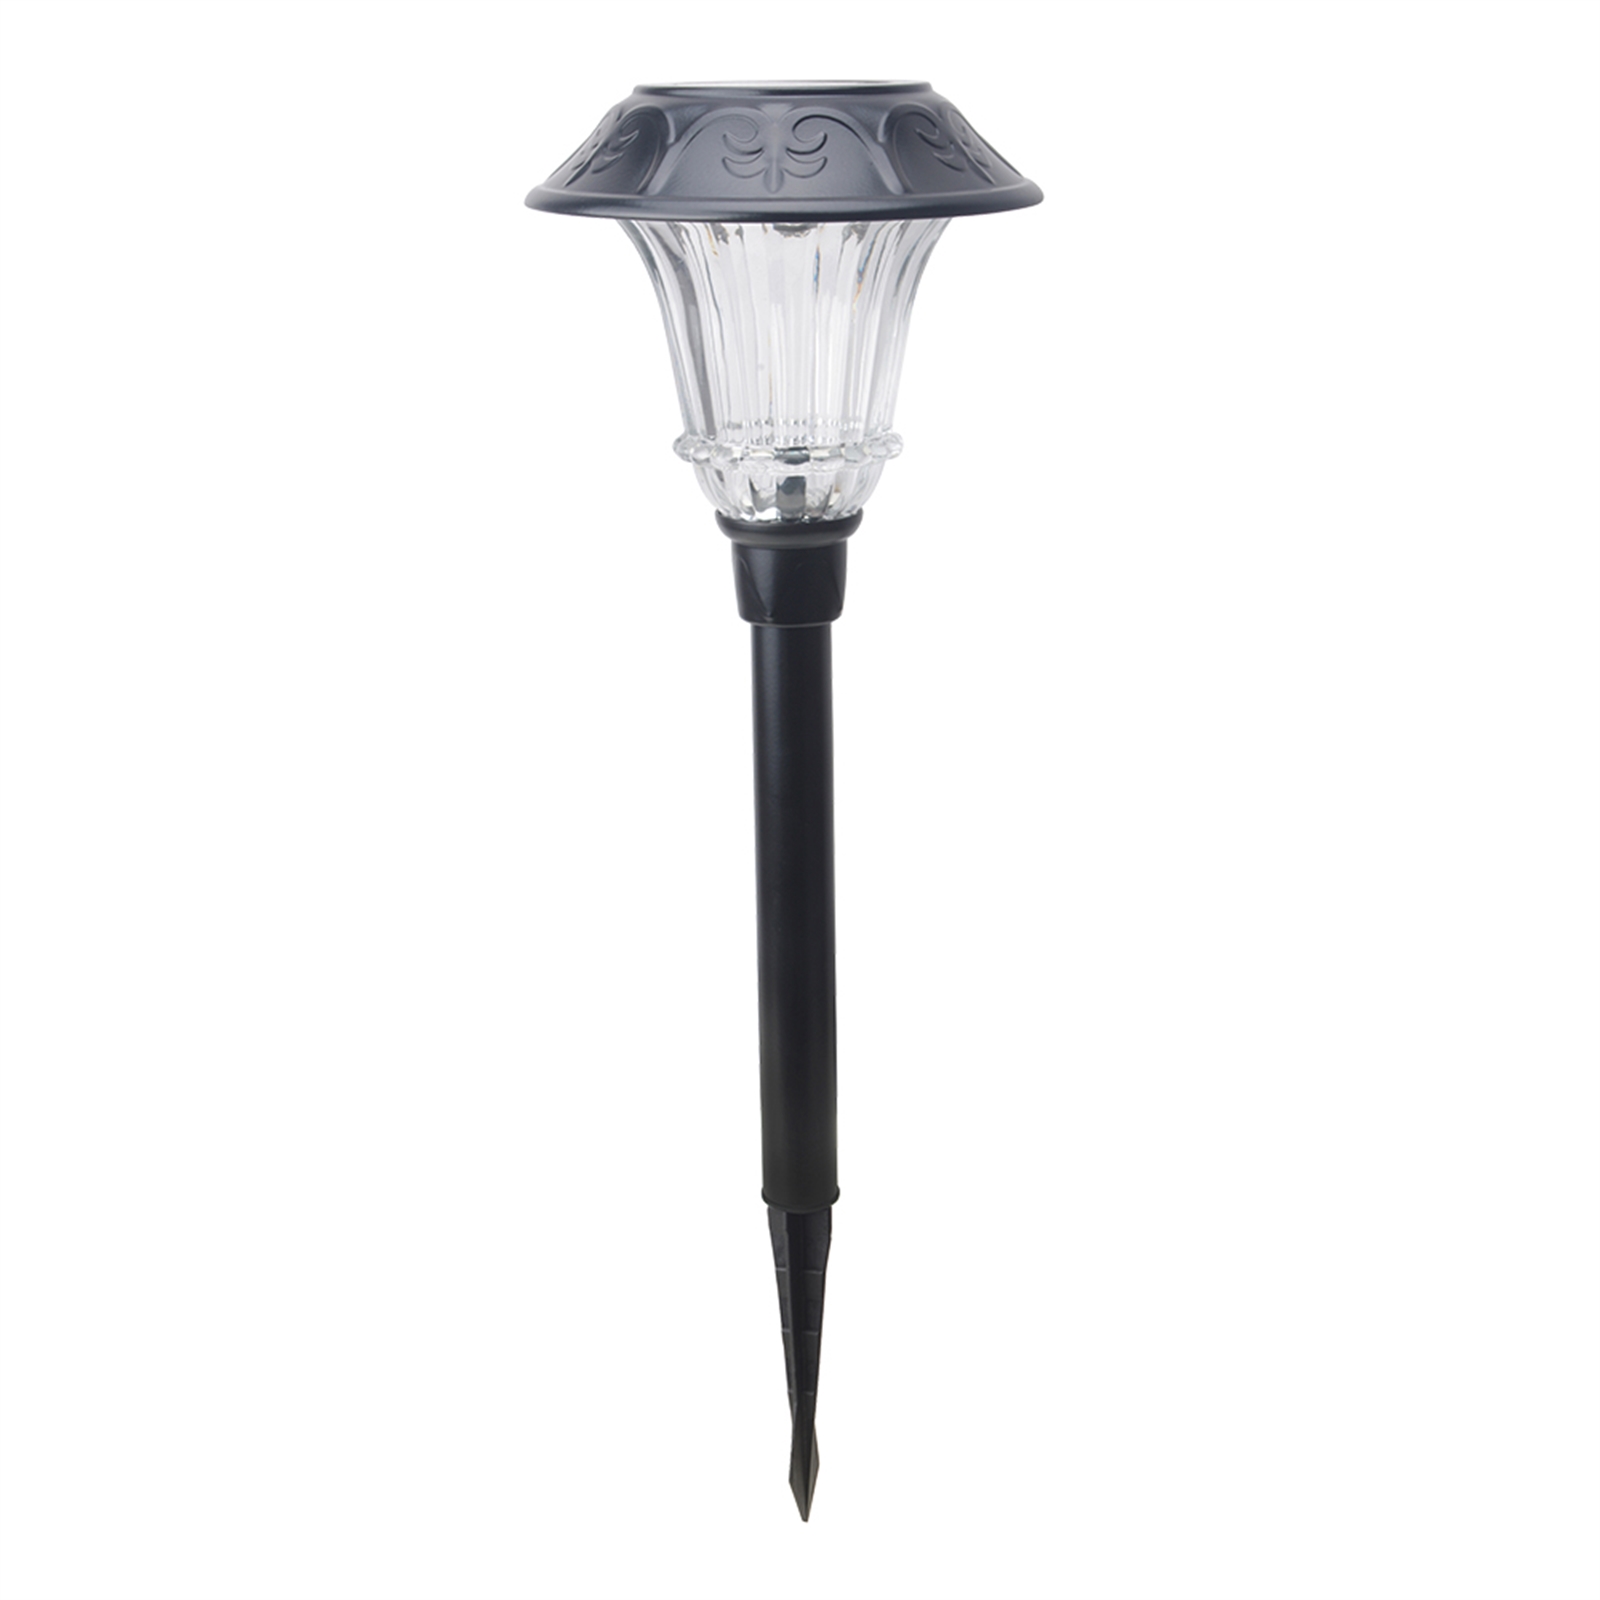 Duracell Charcoal LED Solar Pathway Light